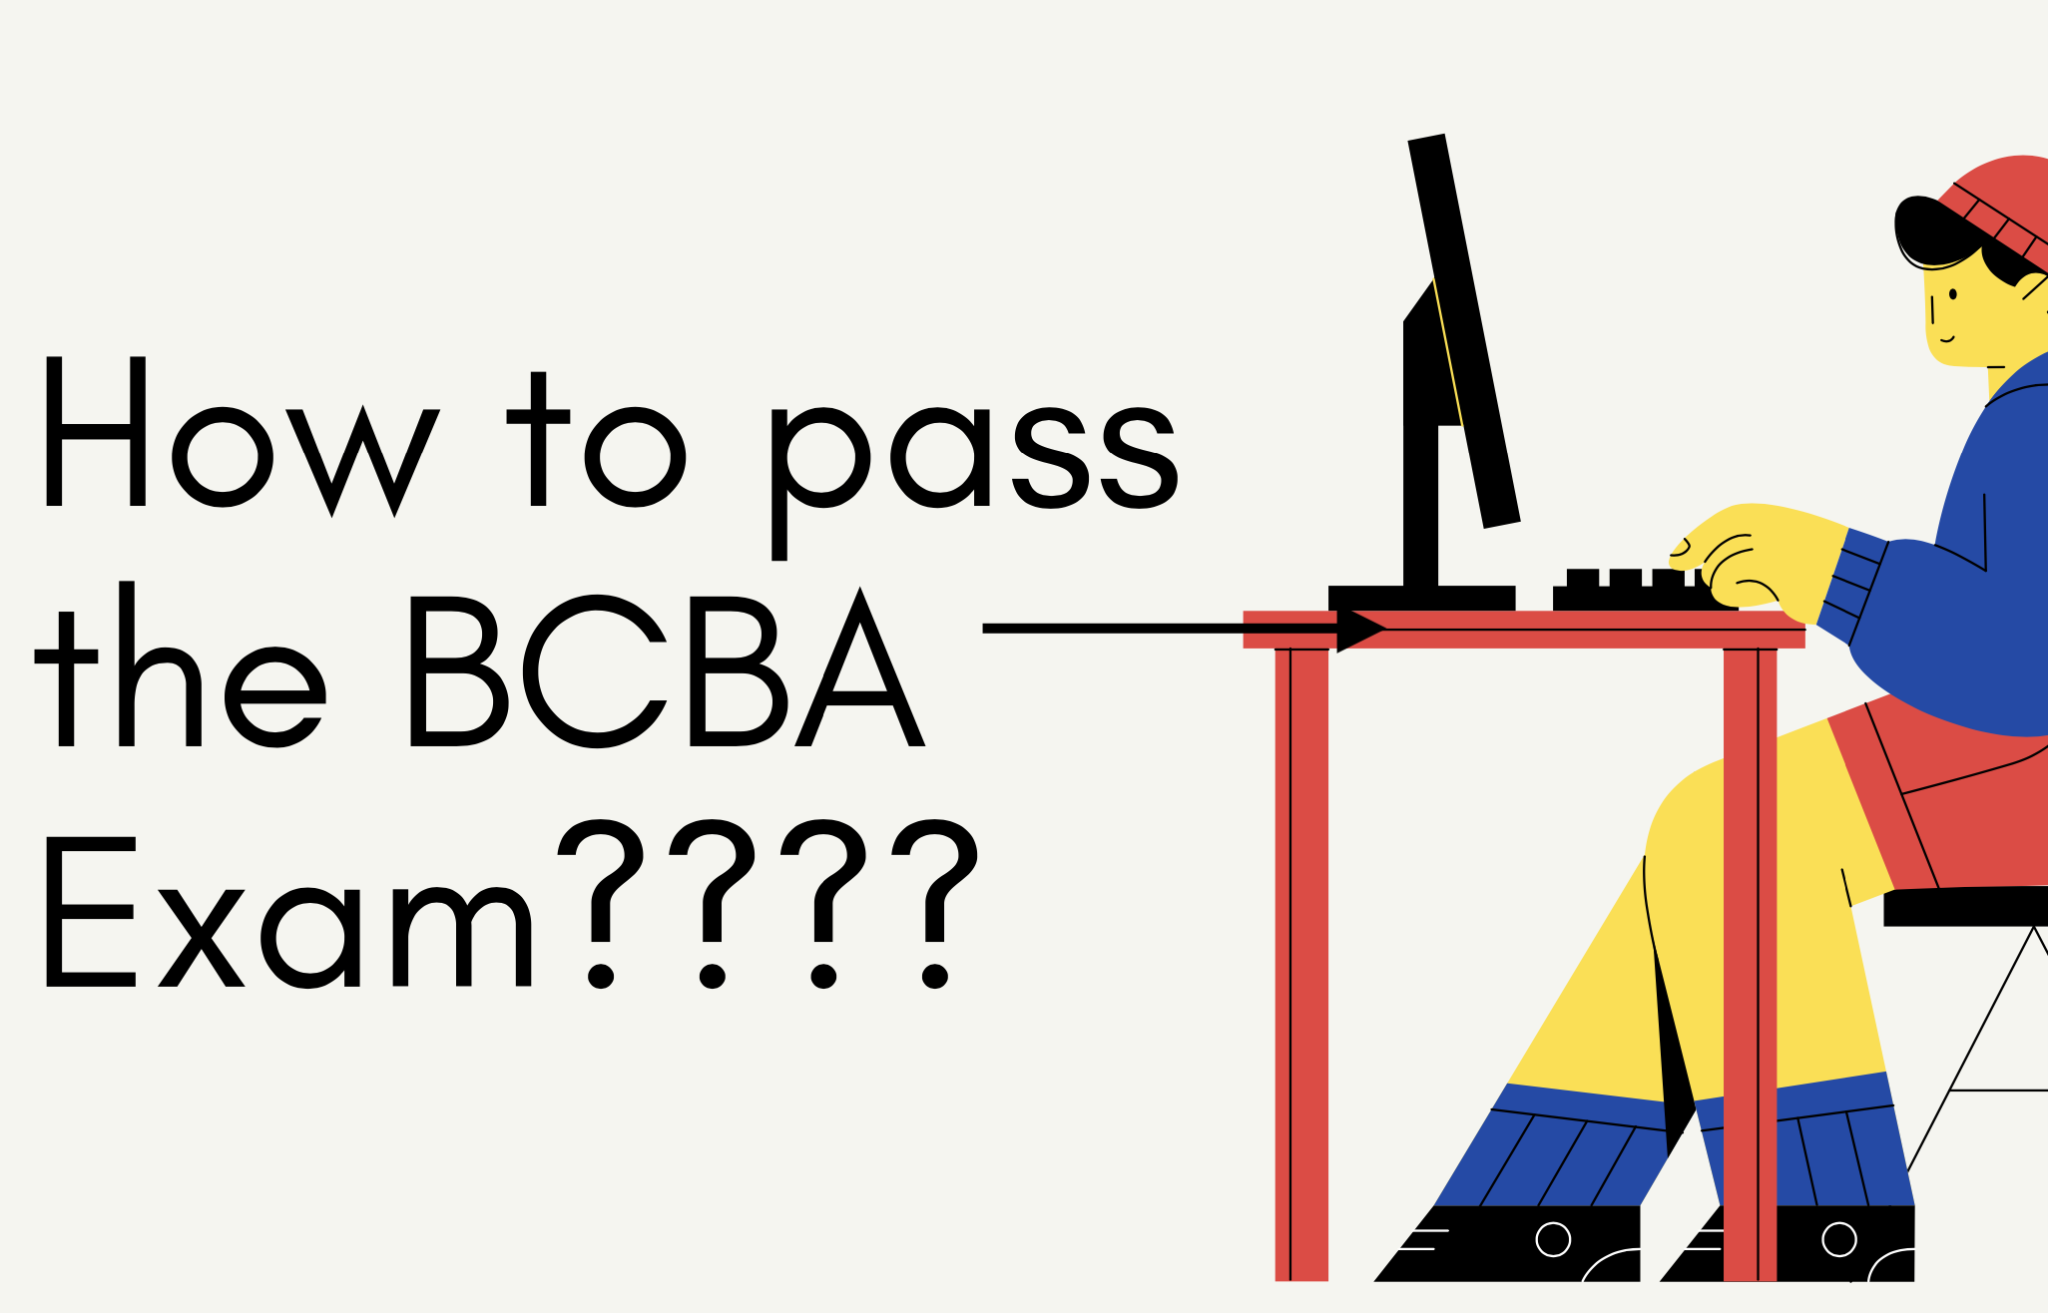 Pass BCBA Exam Score & Requirements You Need to Know